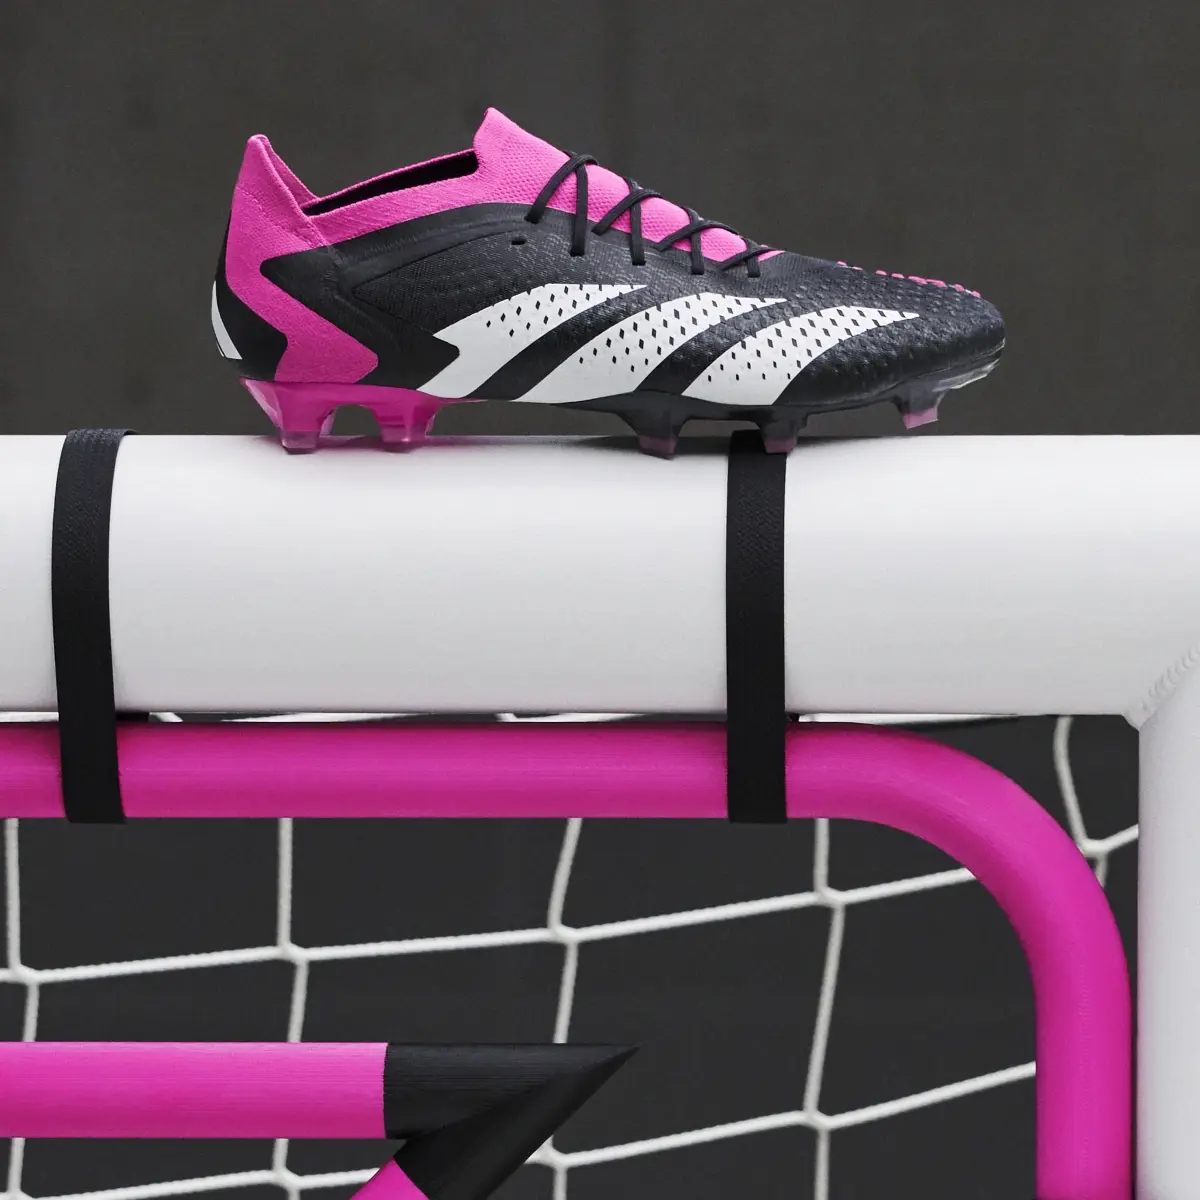 Adidas Predator Accuracy.1 Low Firm Ground Cleats. 2